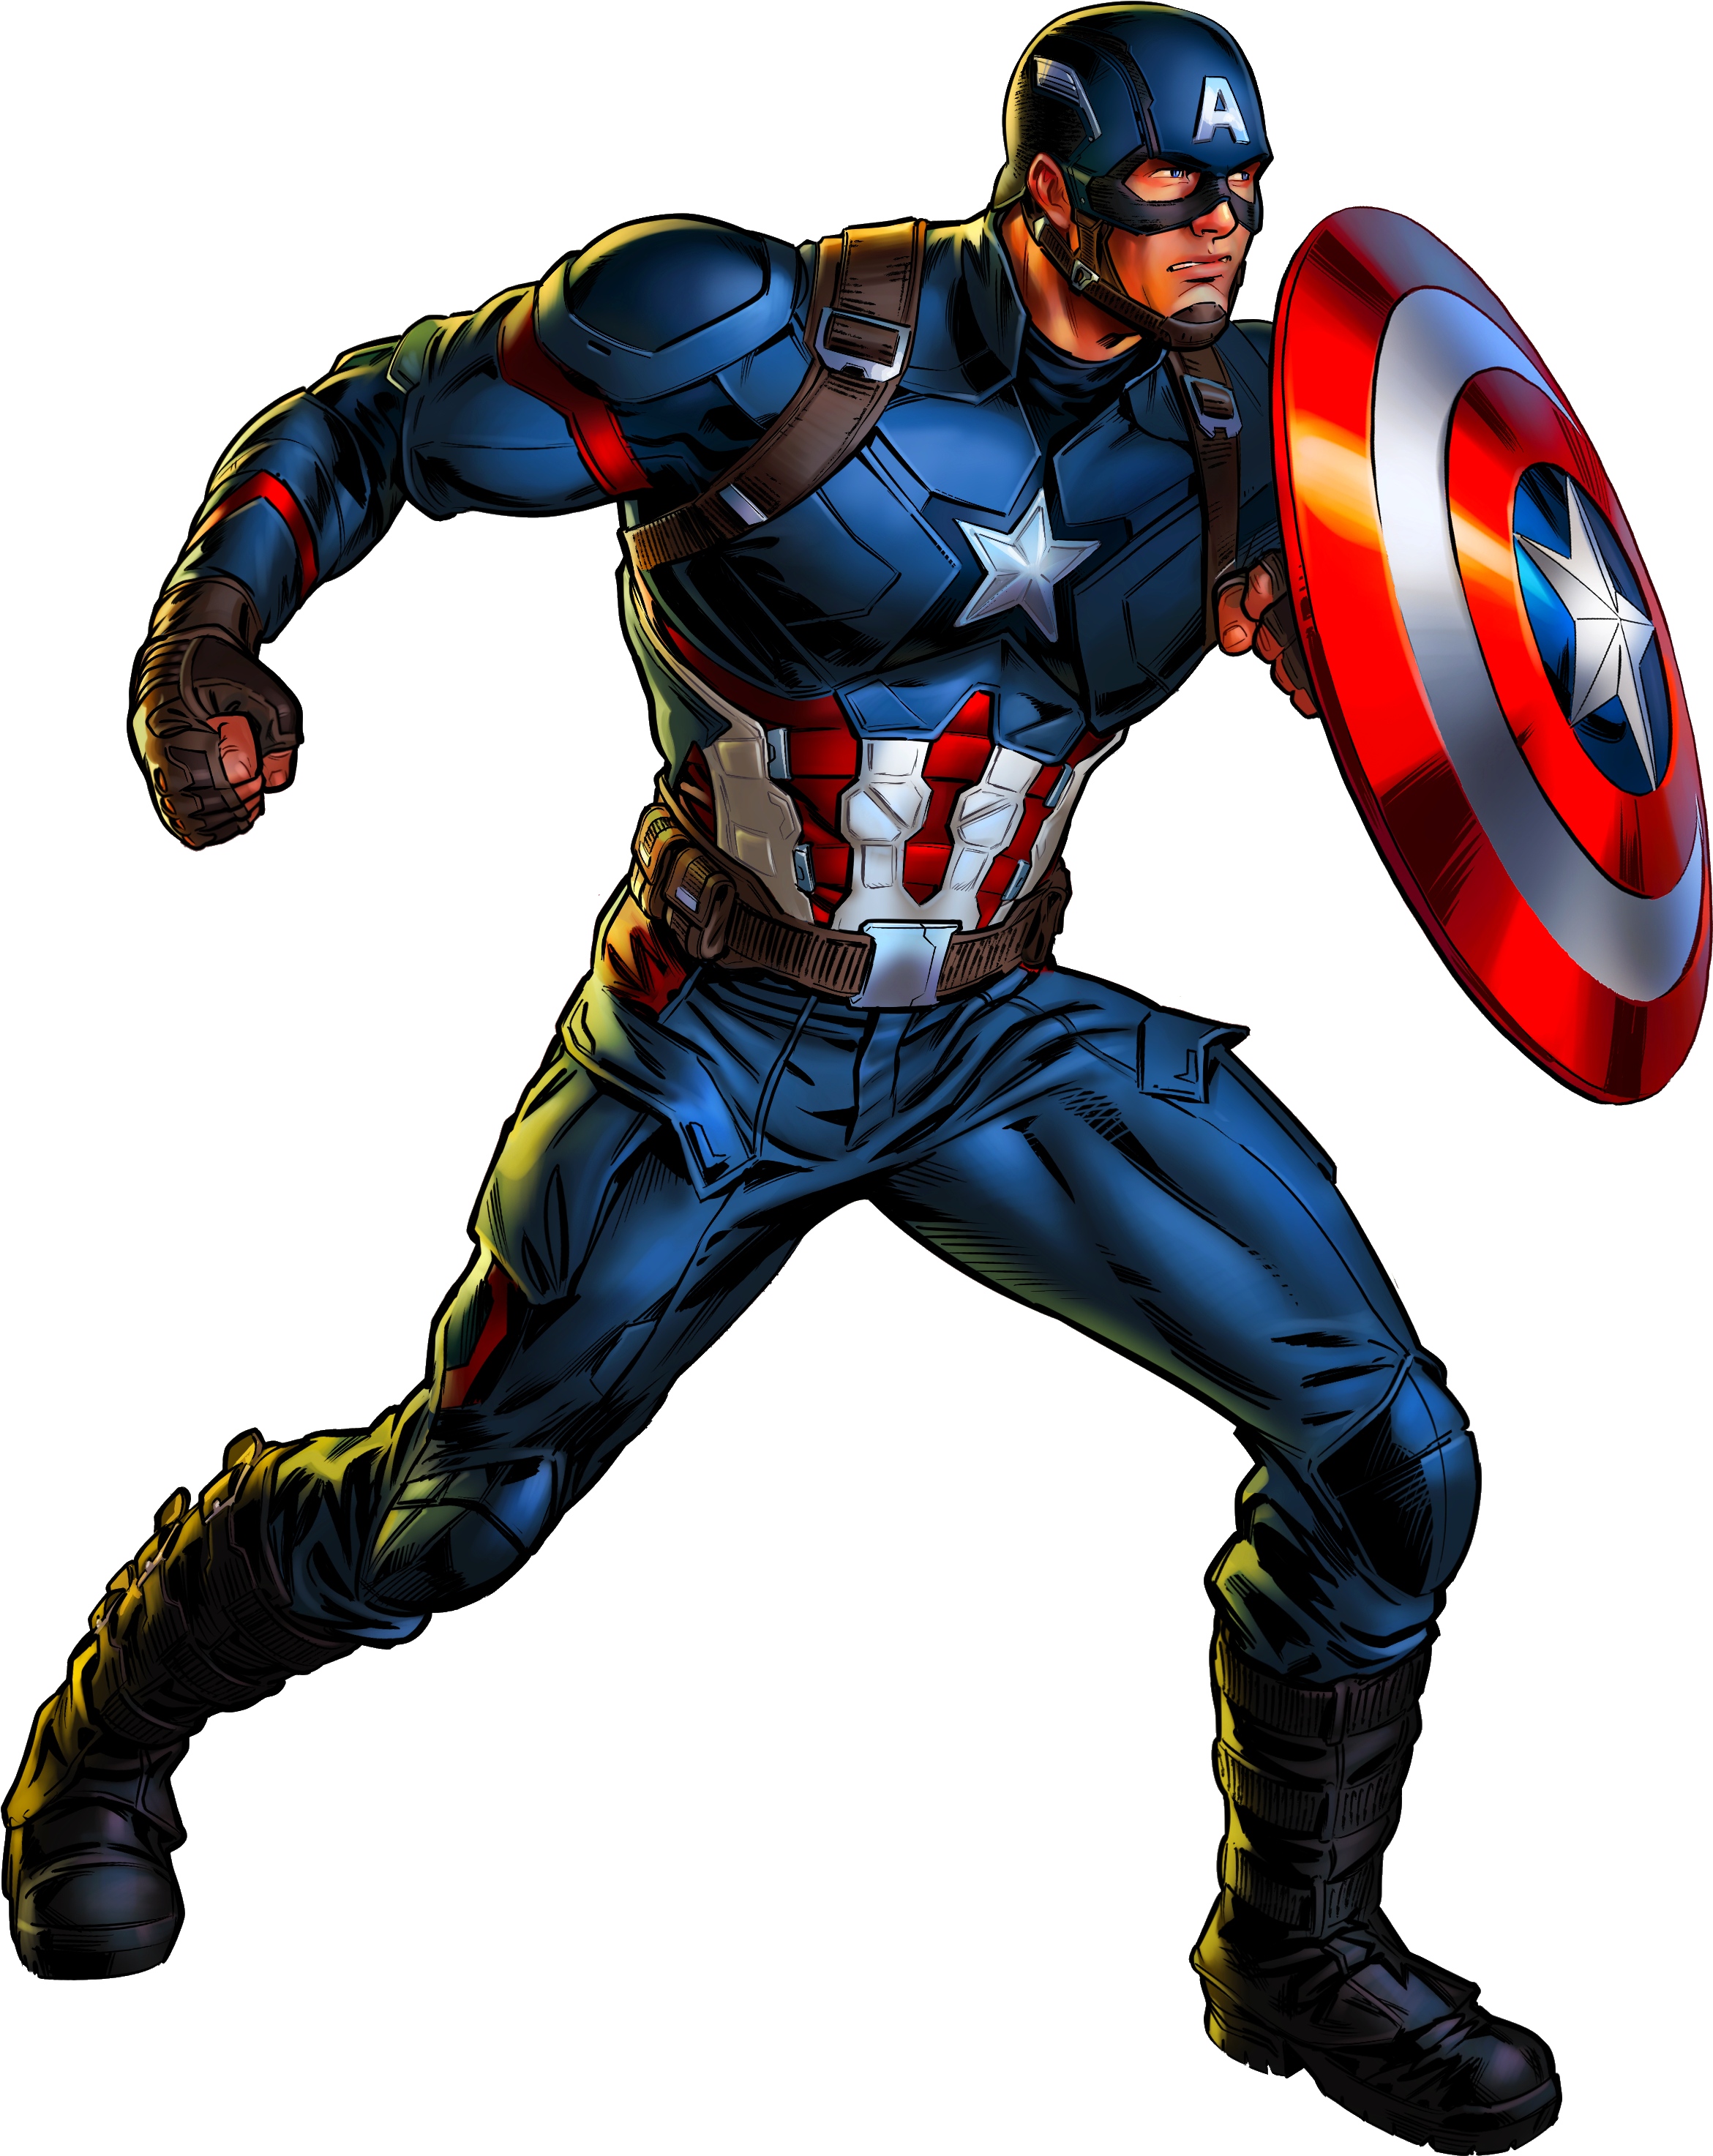 Avengers Alliance 2 Captain America, Find more high quality free transparen...